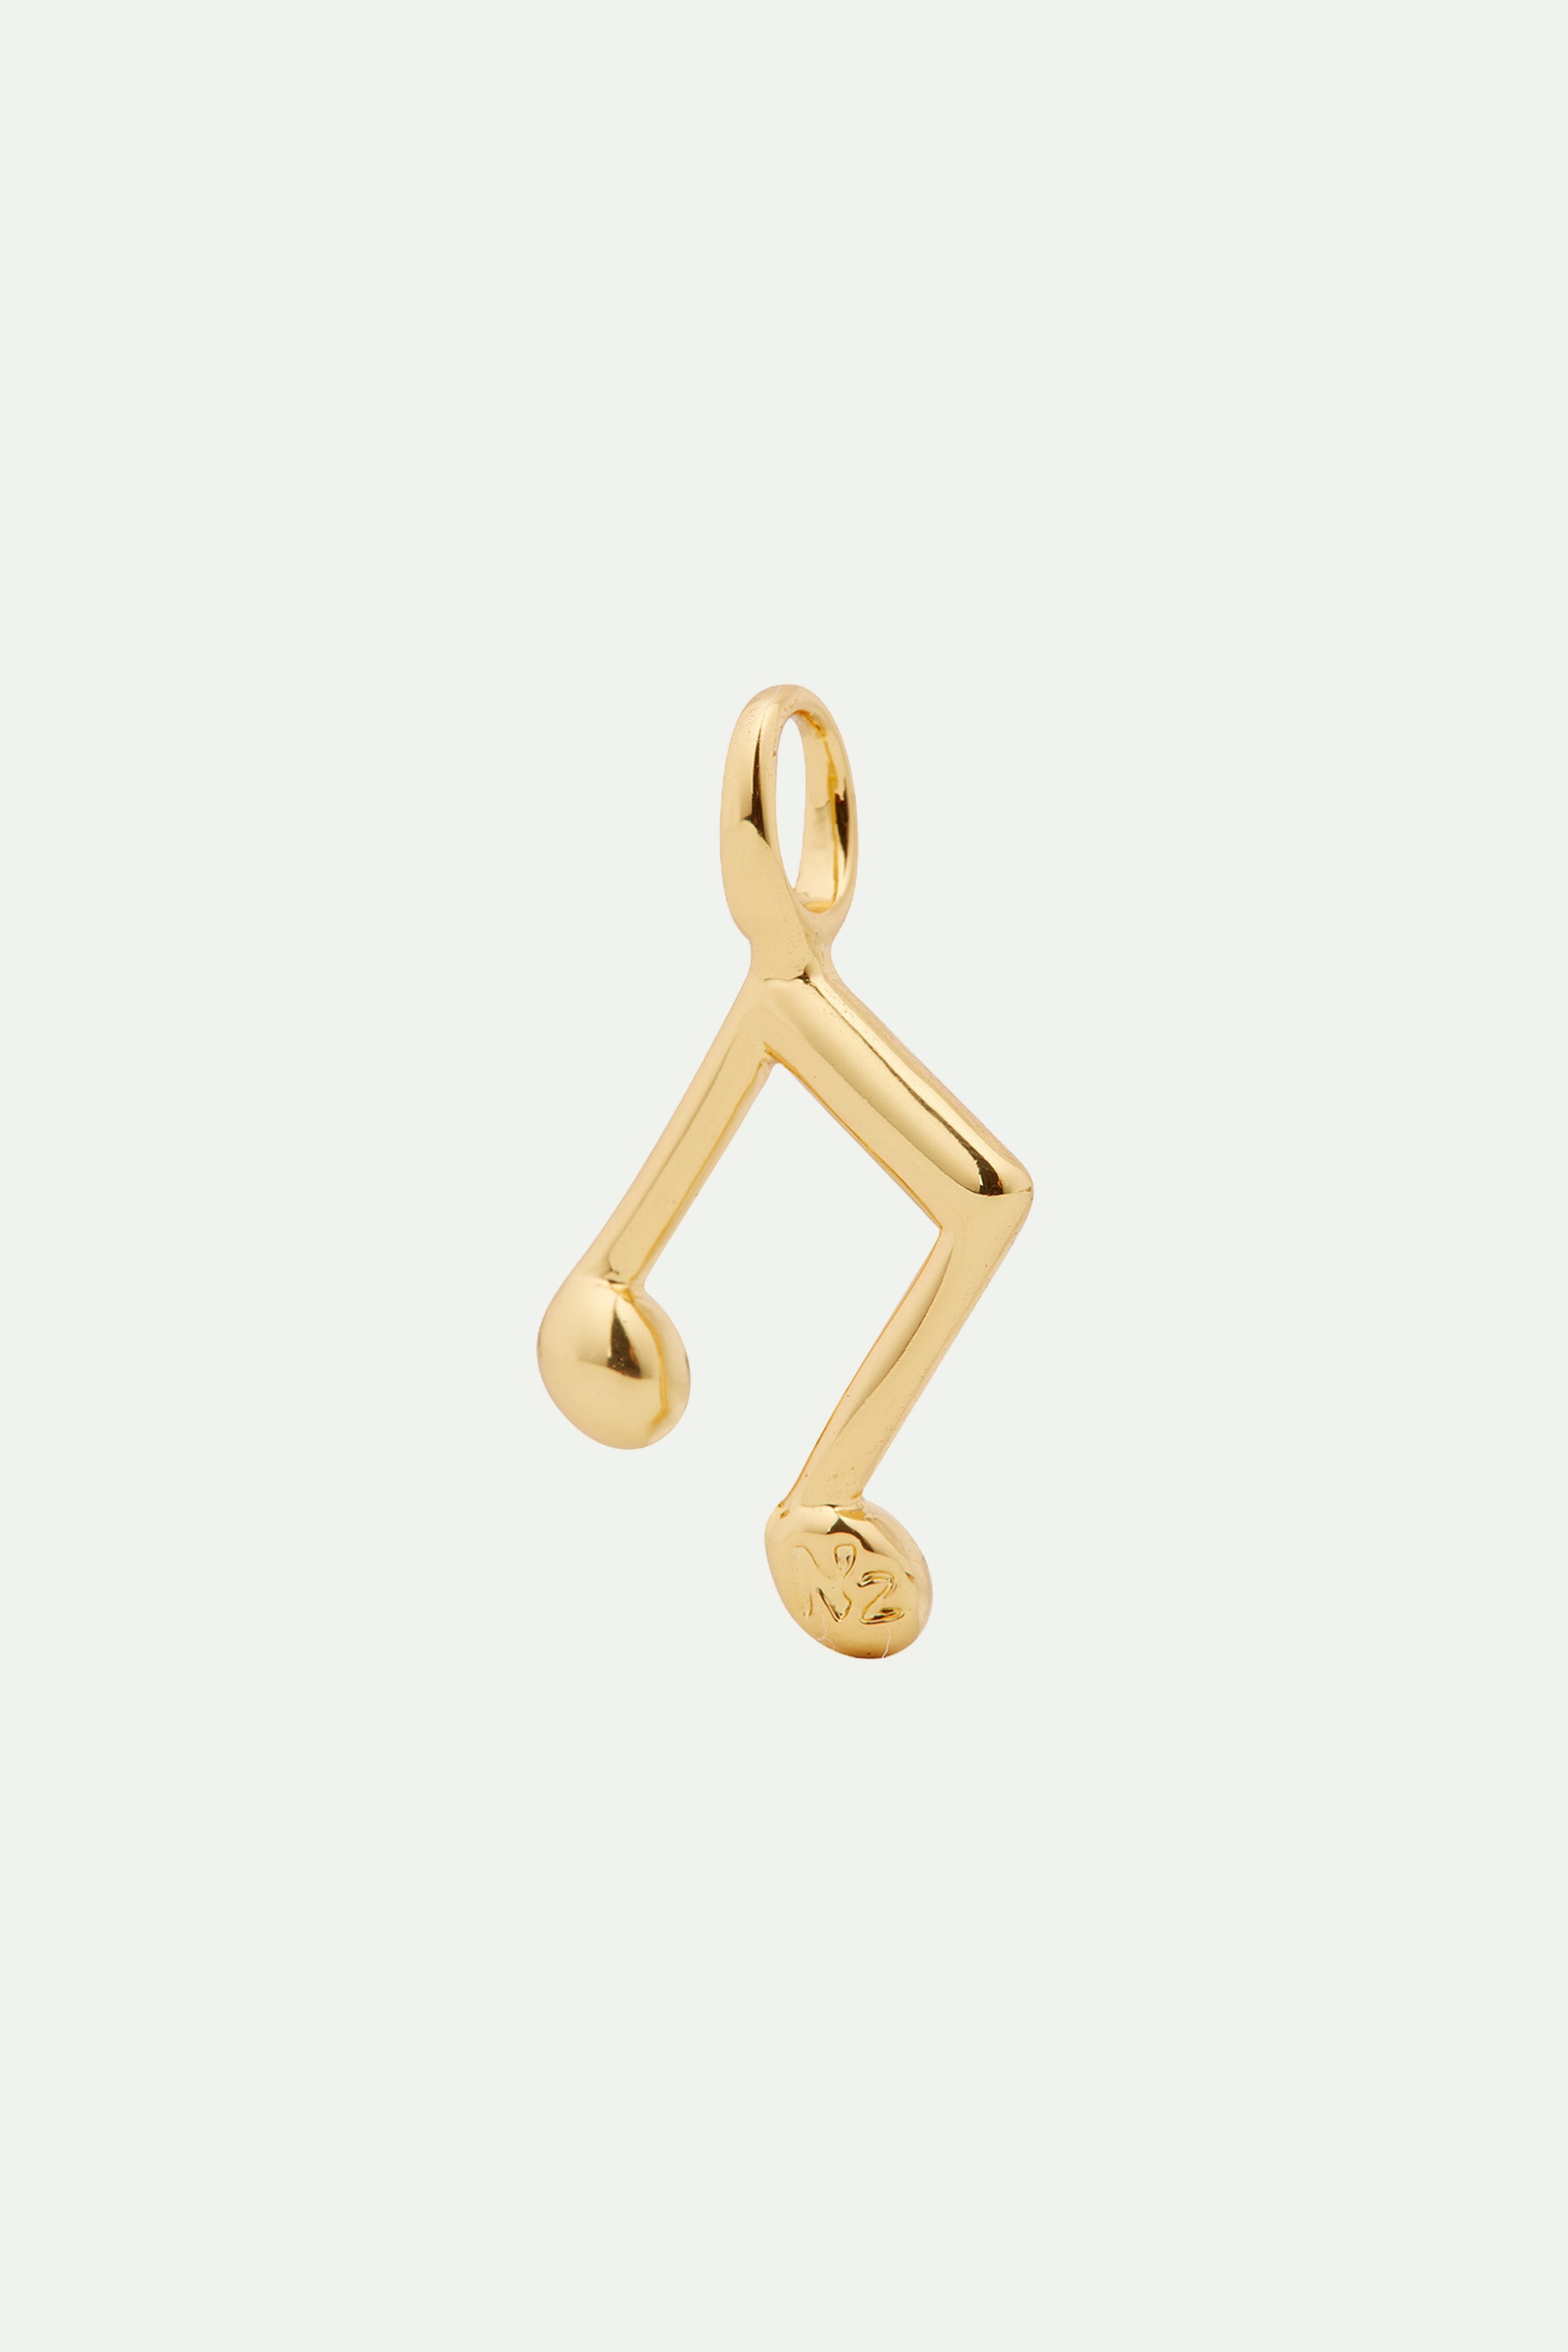 Musical note charm